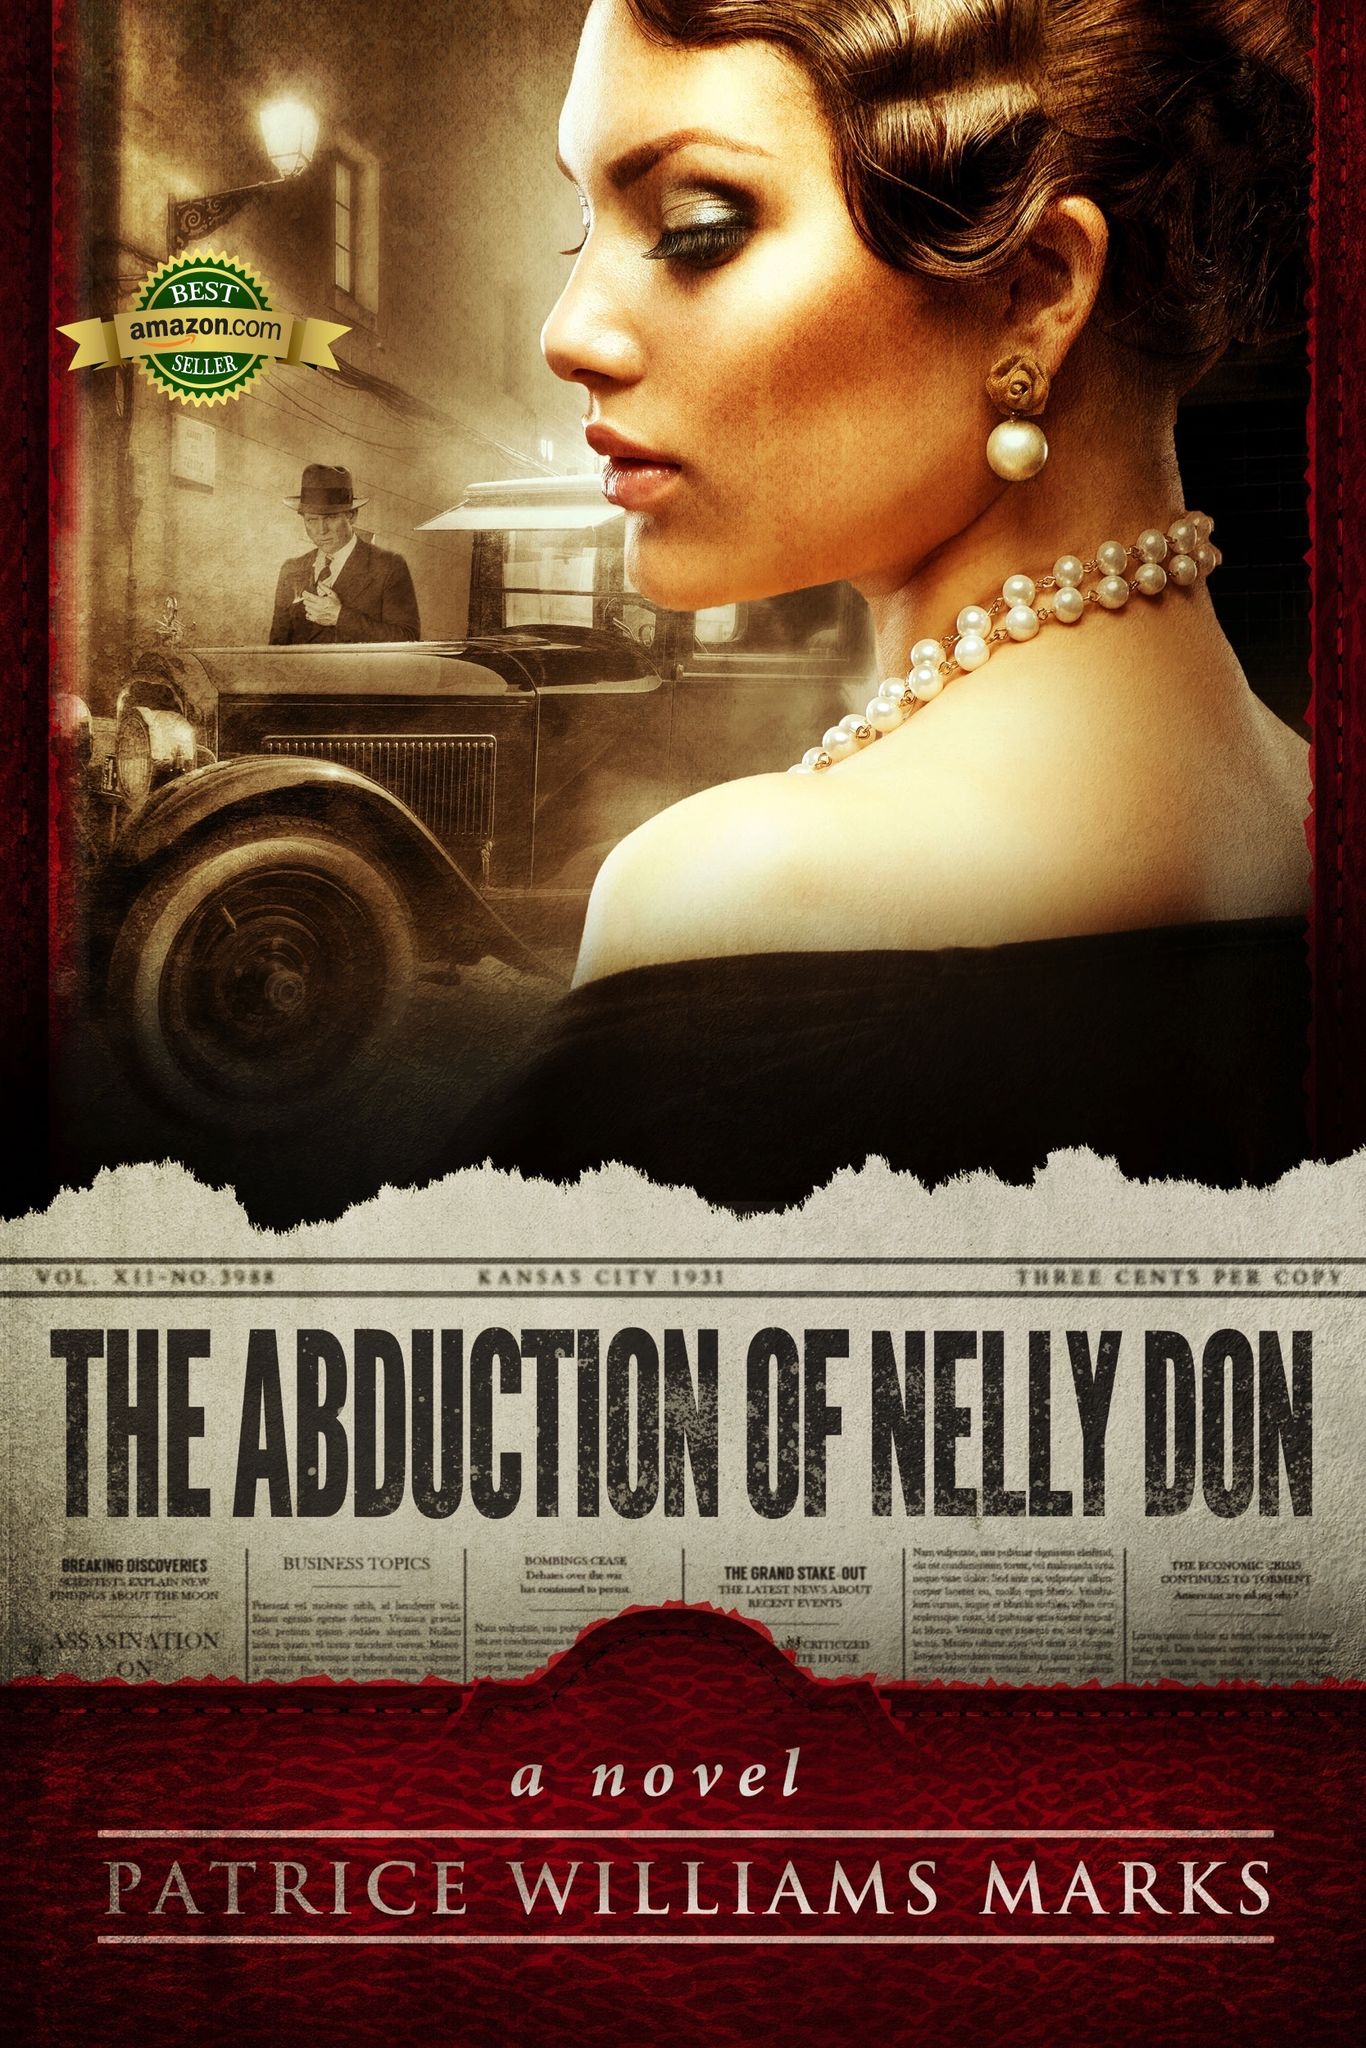 THE ABDUCTION OF NELLY DON